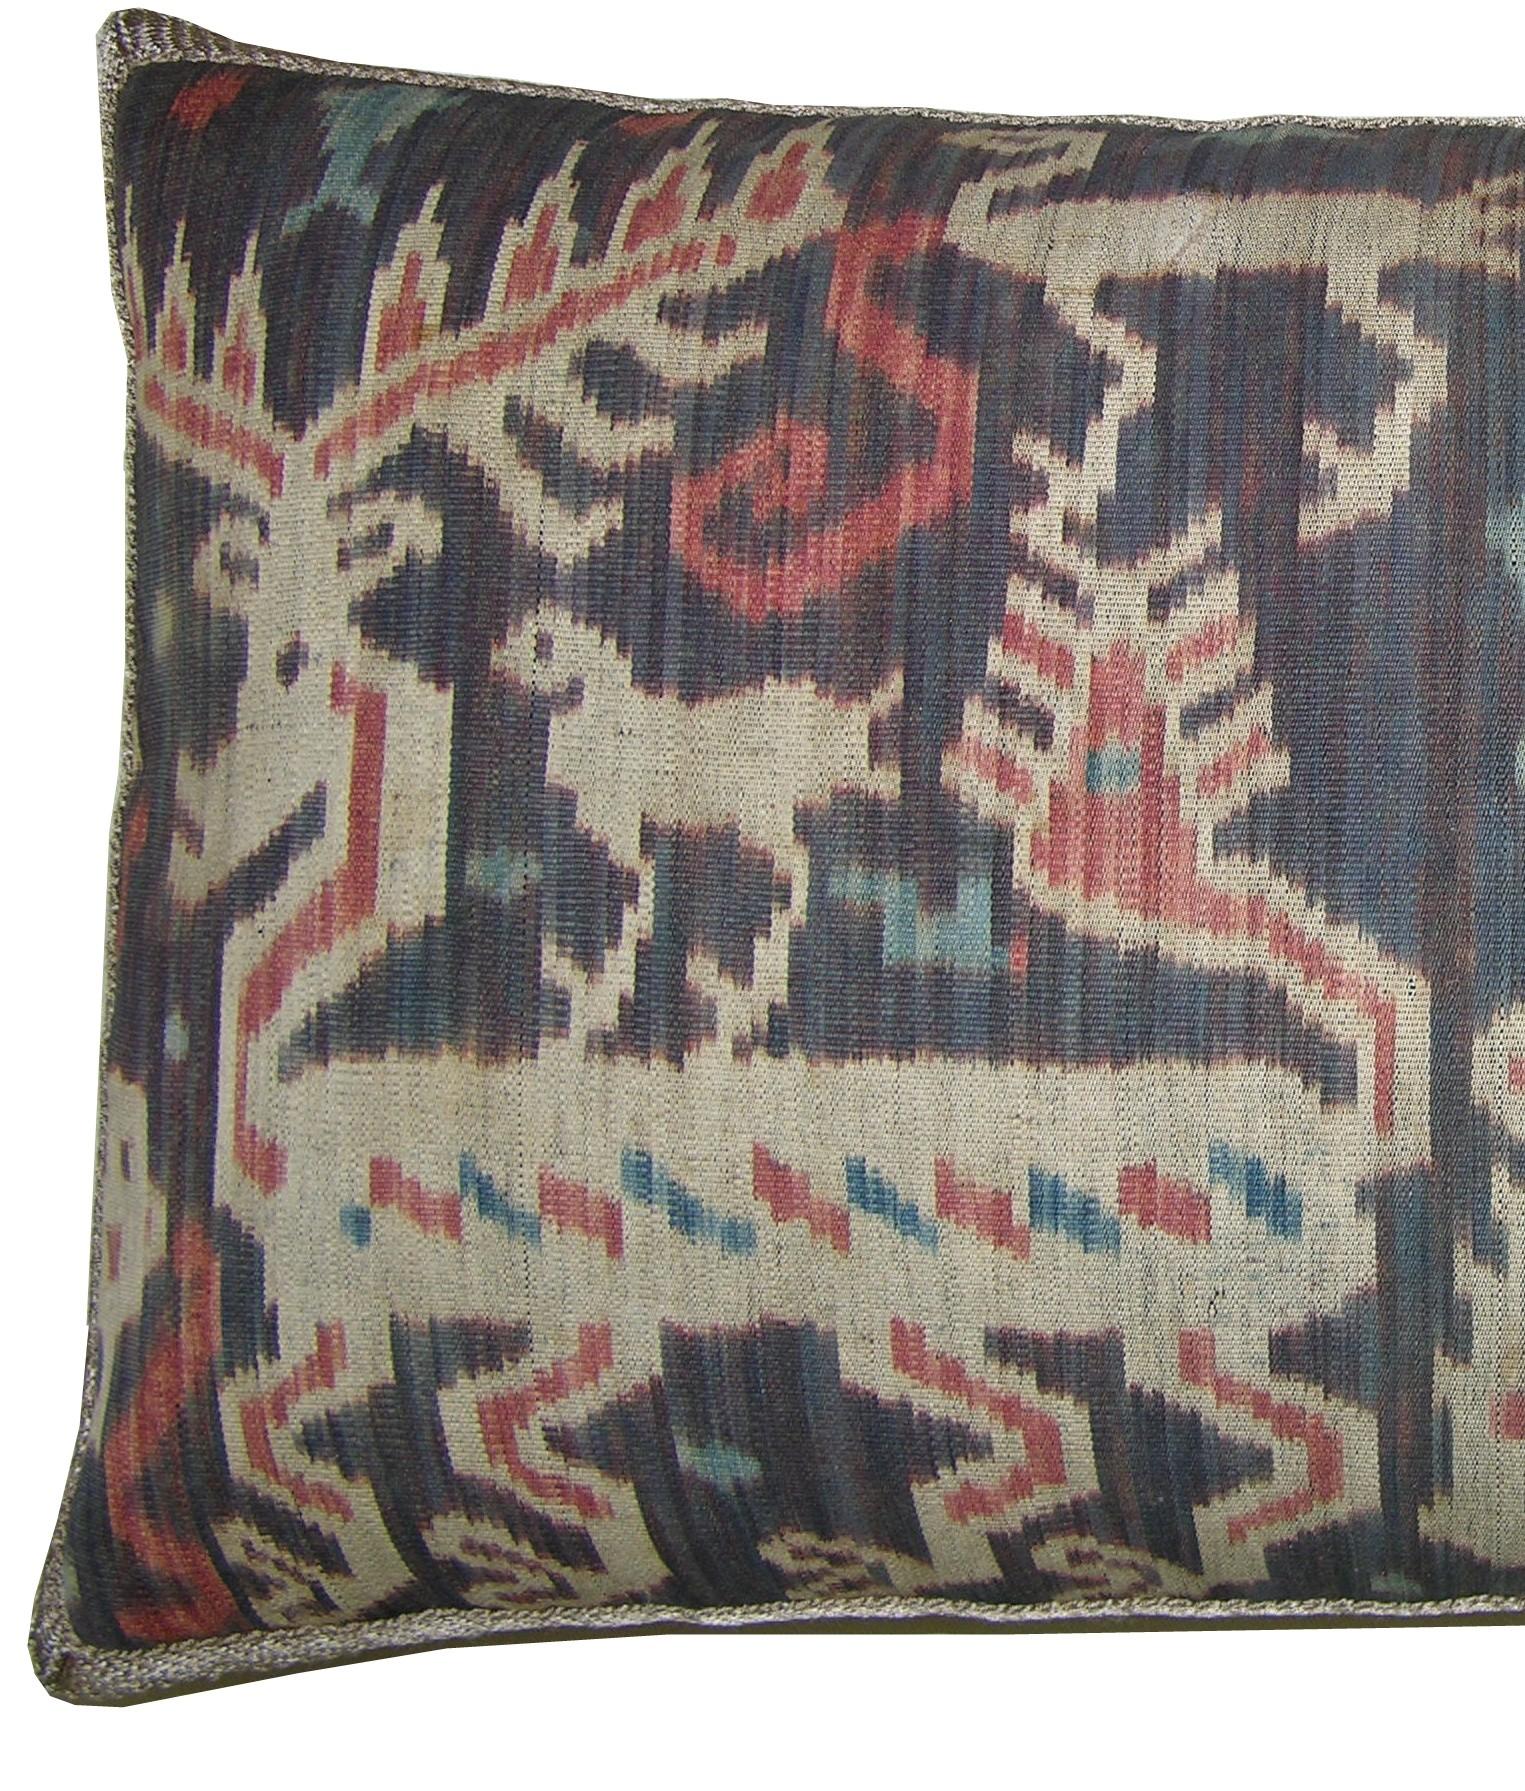 Ca. 1850 Antique Ikat Tapestry Pillow